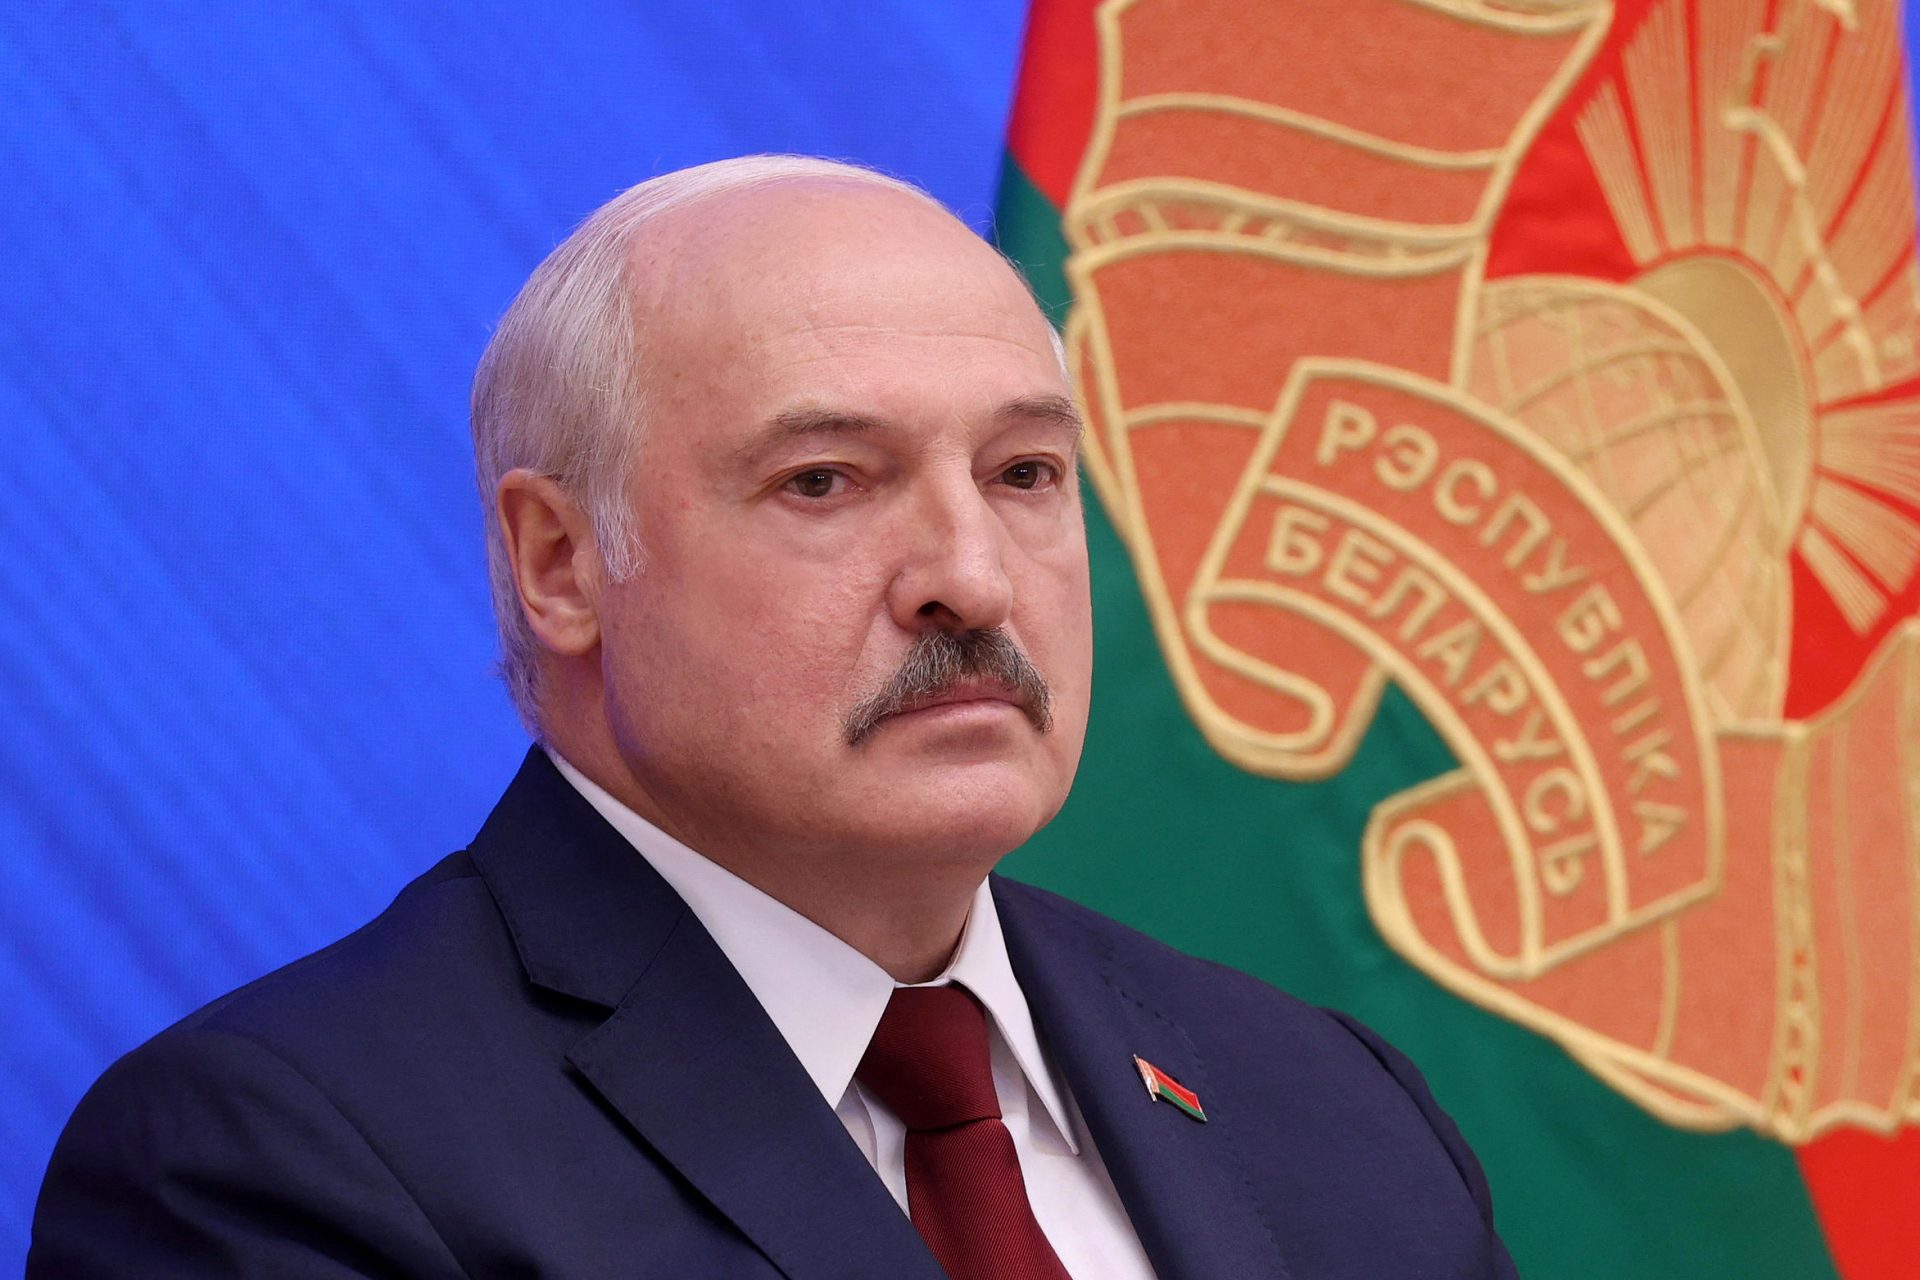 Belarusian hackers are attempting to overthrow the Lukashenko regime